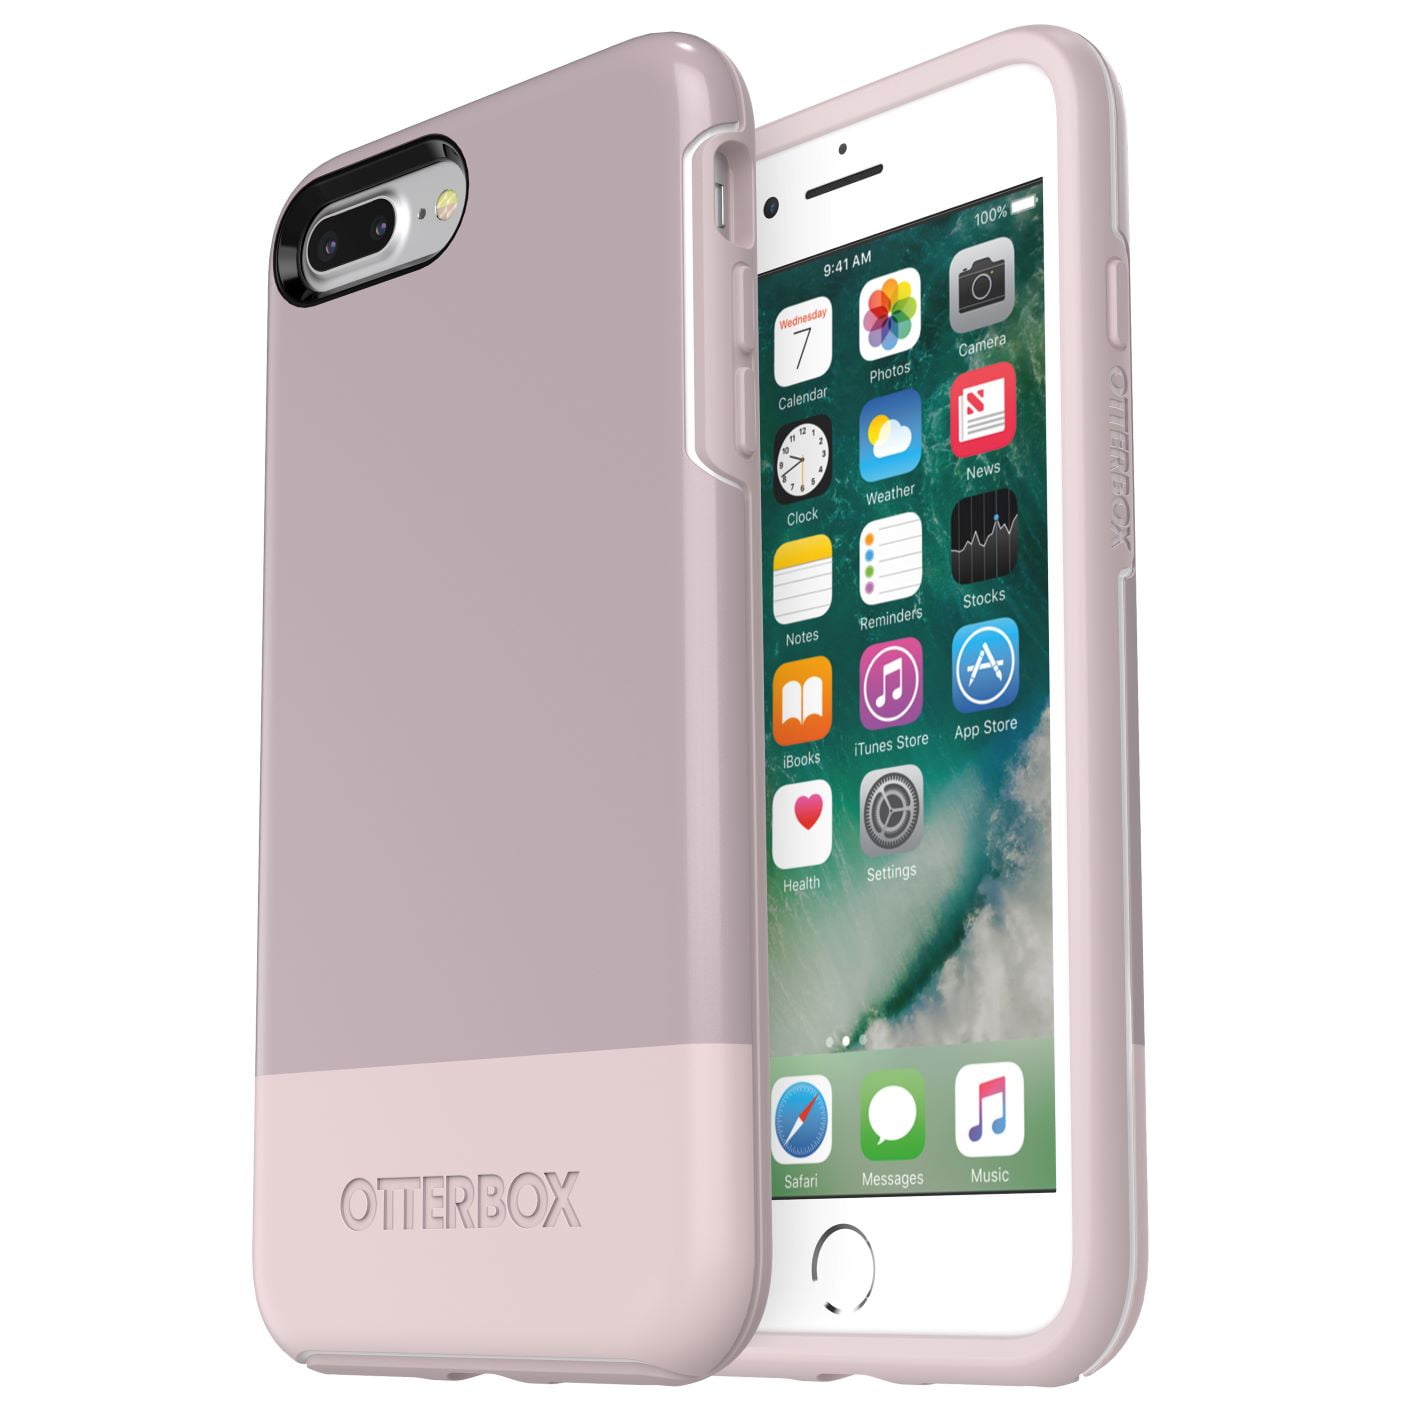 OtterBox Symmetry Series Case for iPhone 8 and 7 Plus, Skinny Dip